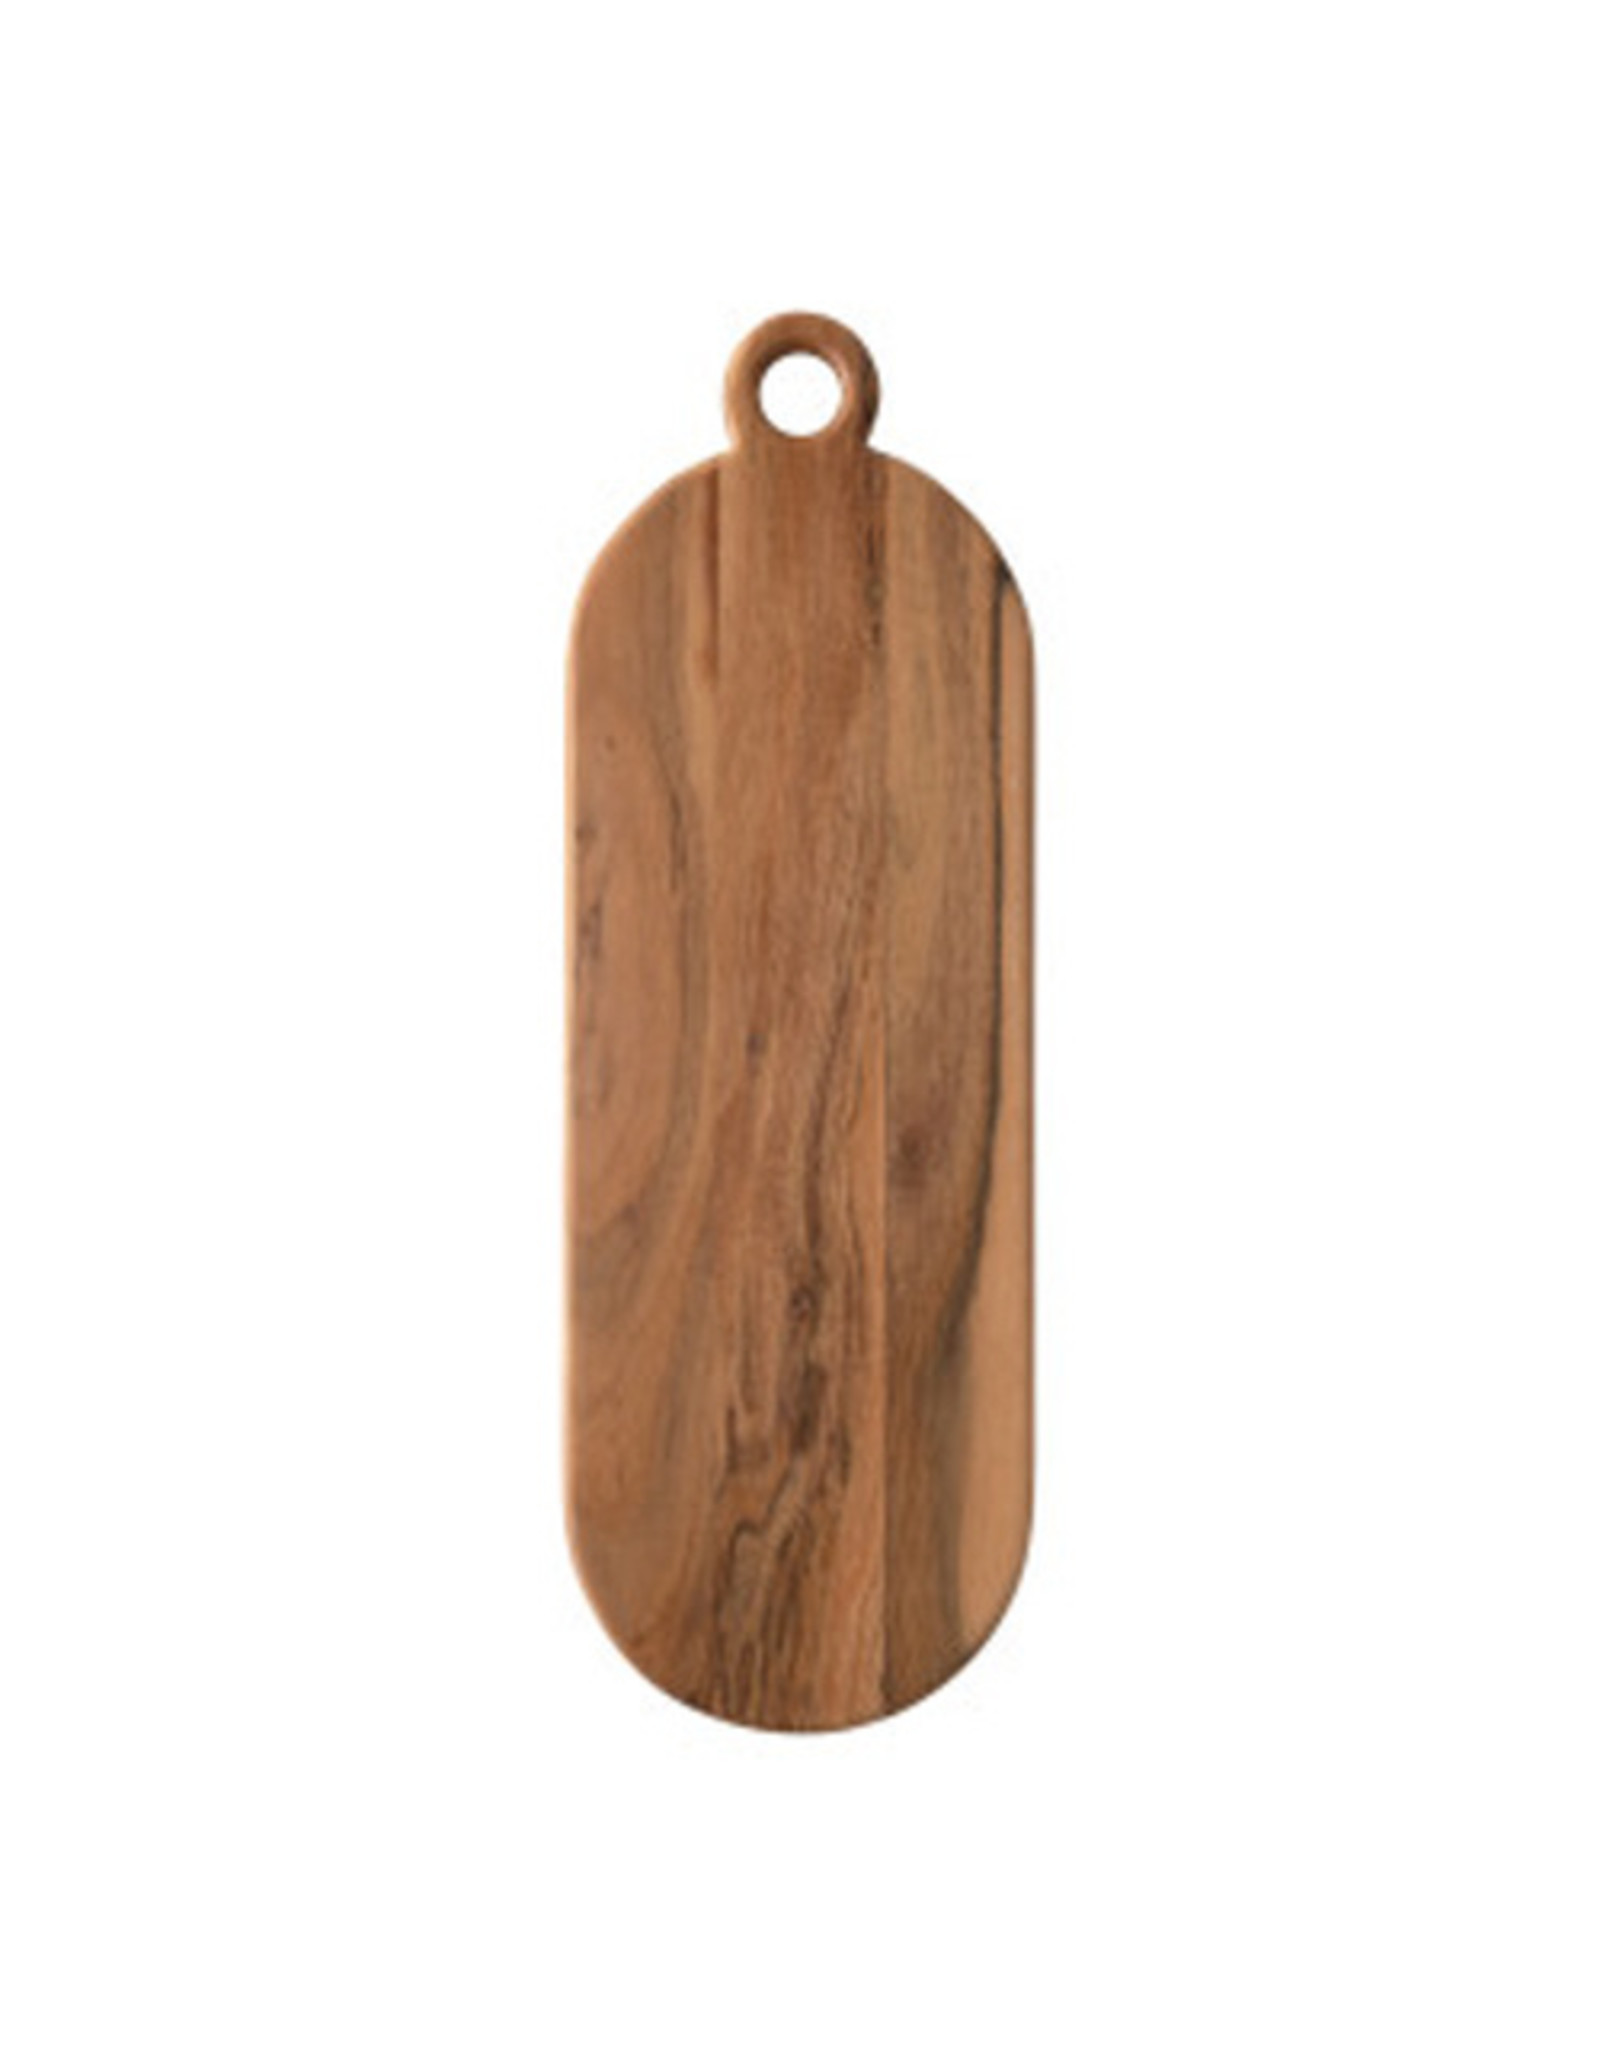 Wooden Cheese Board with Round Handle